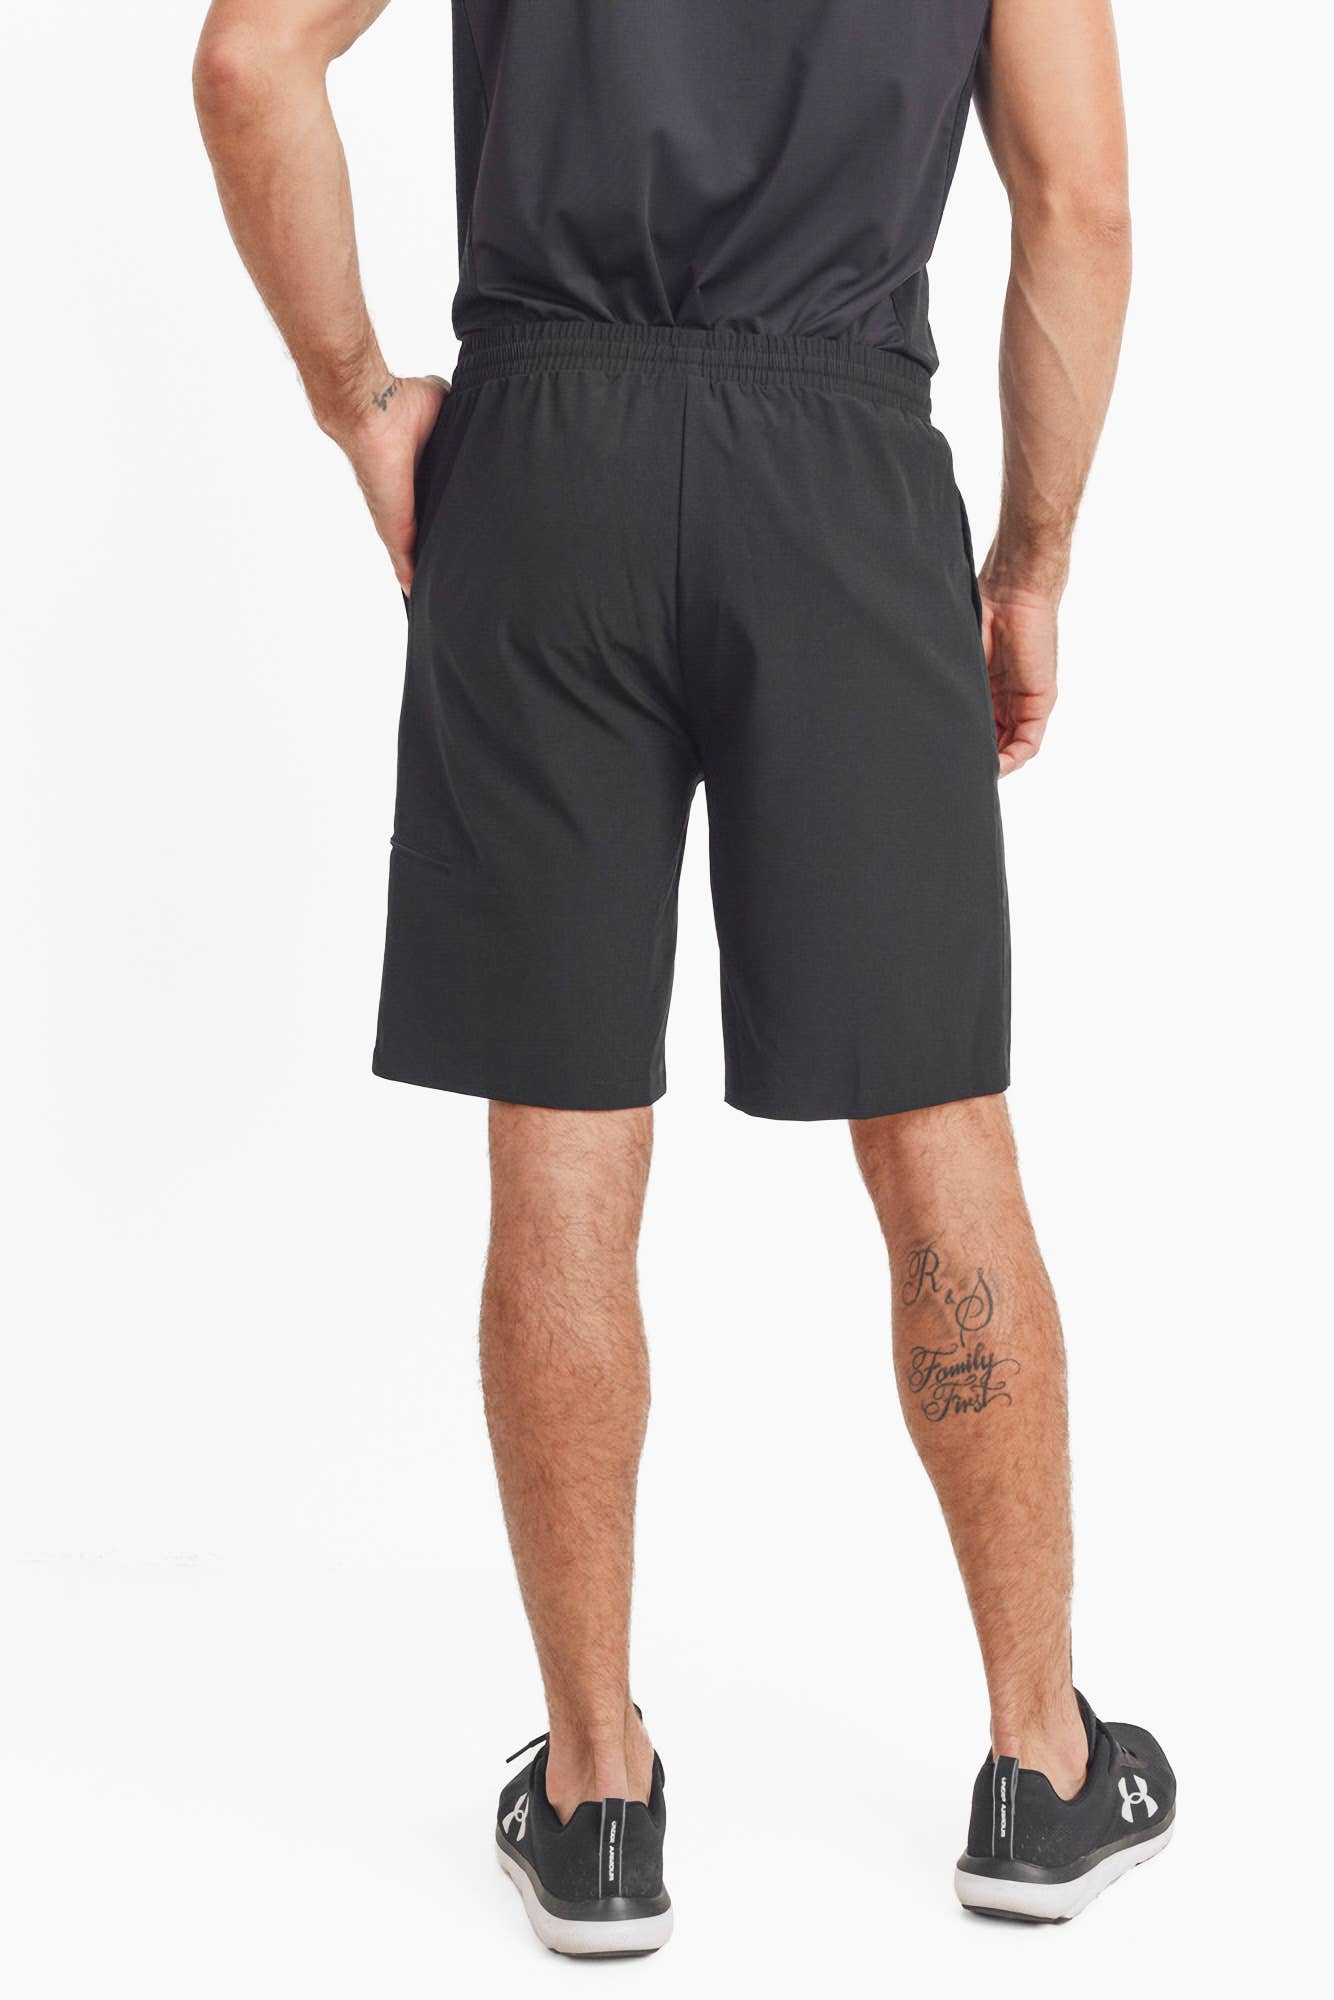 MEN - Active Drawstring Shorts with Zippered Pouch: S:M:L:XL (1:2:2:1) / BLACK - Storm and Sky Shoppe